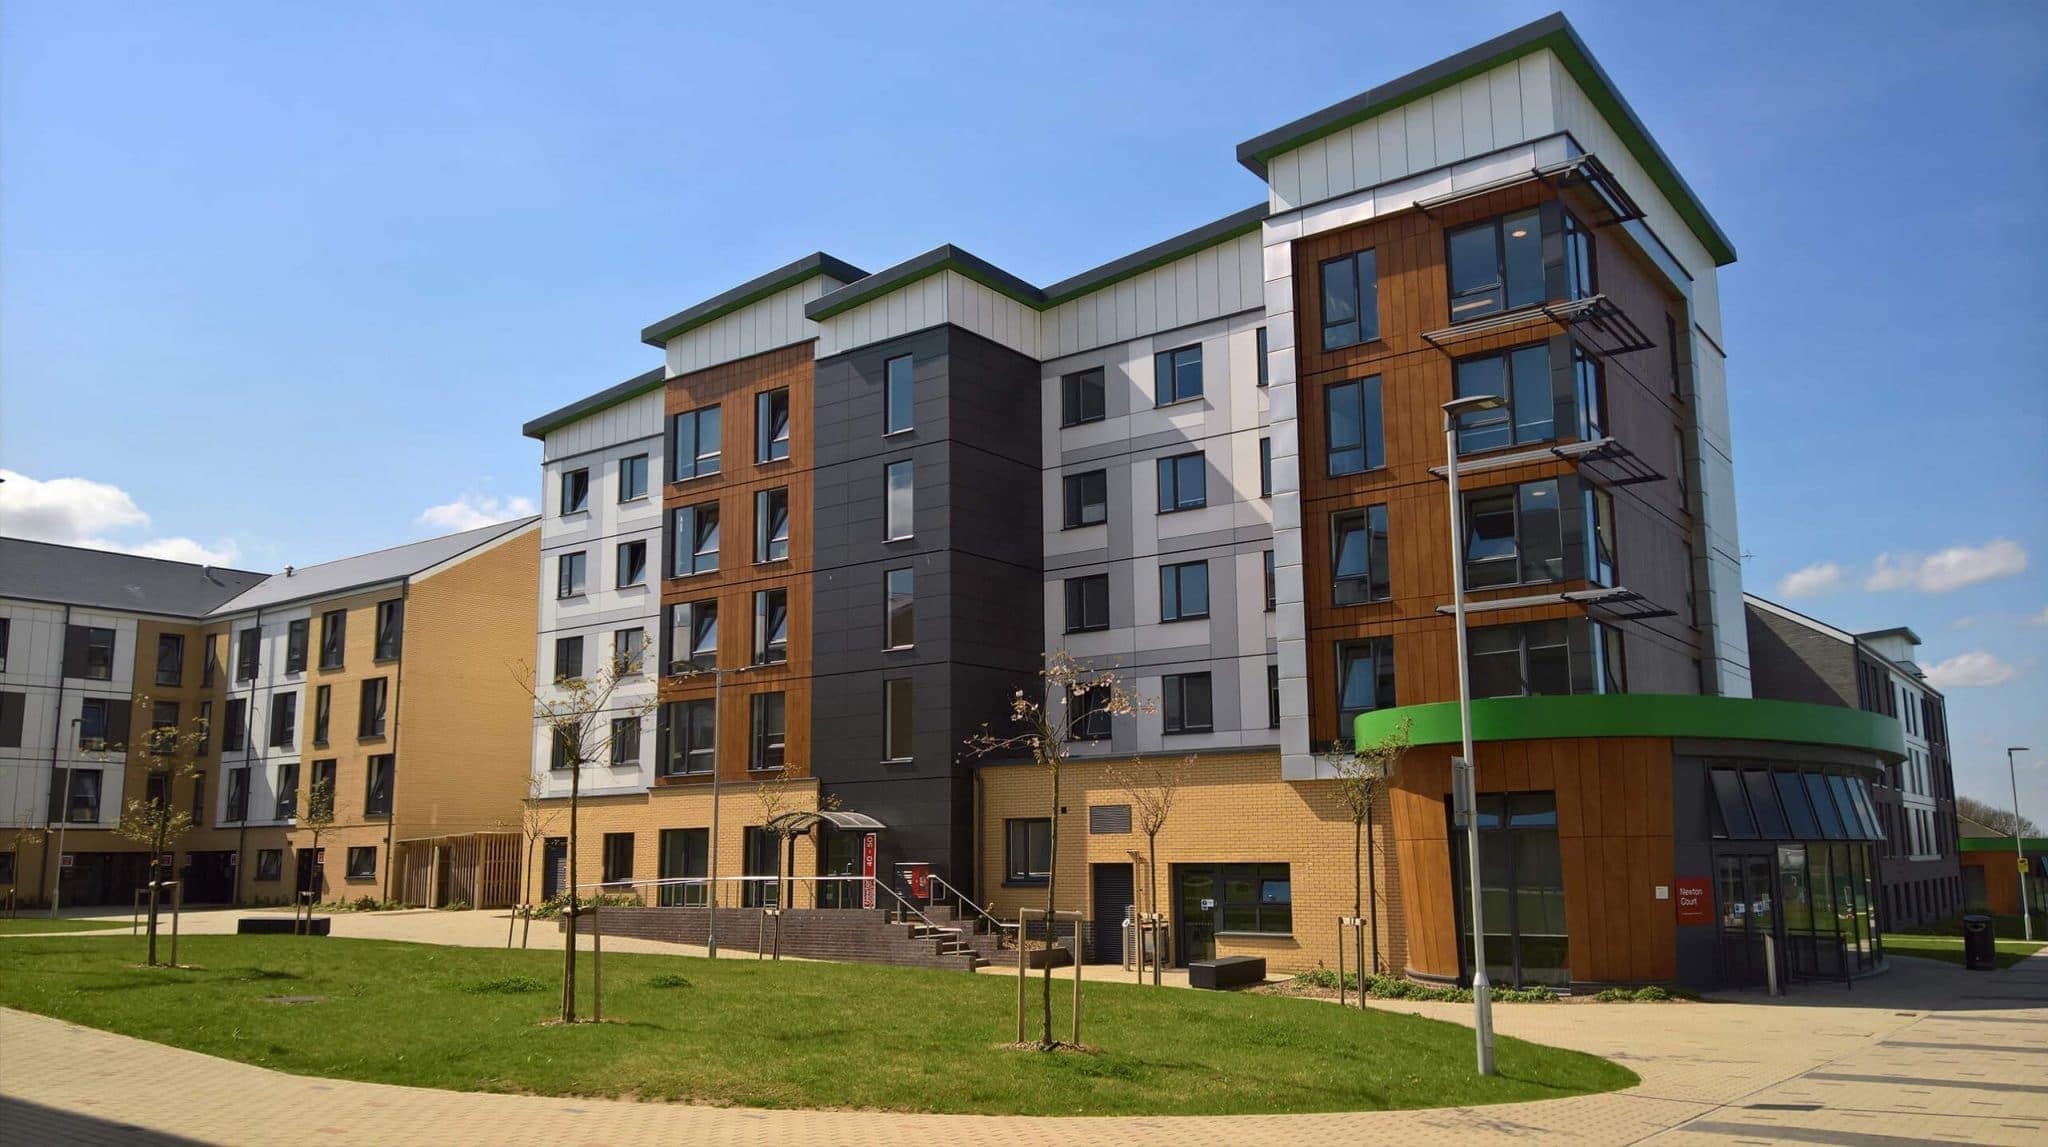 Exterior of student accommodation building including grass area